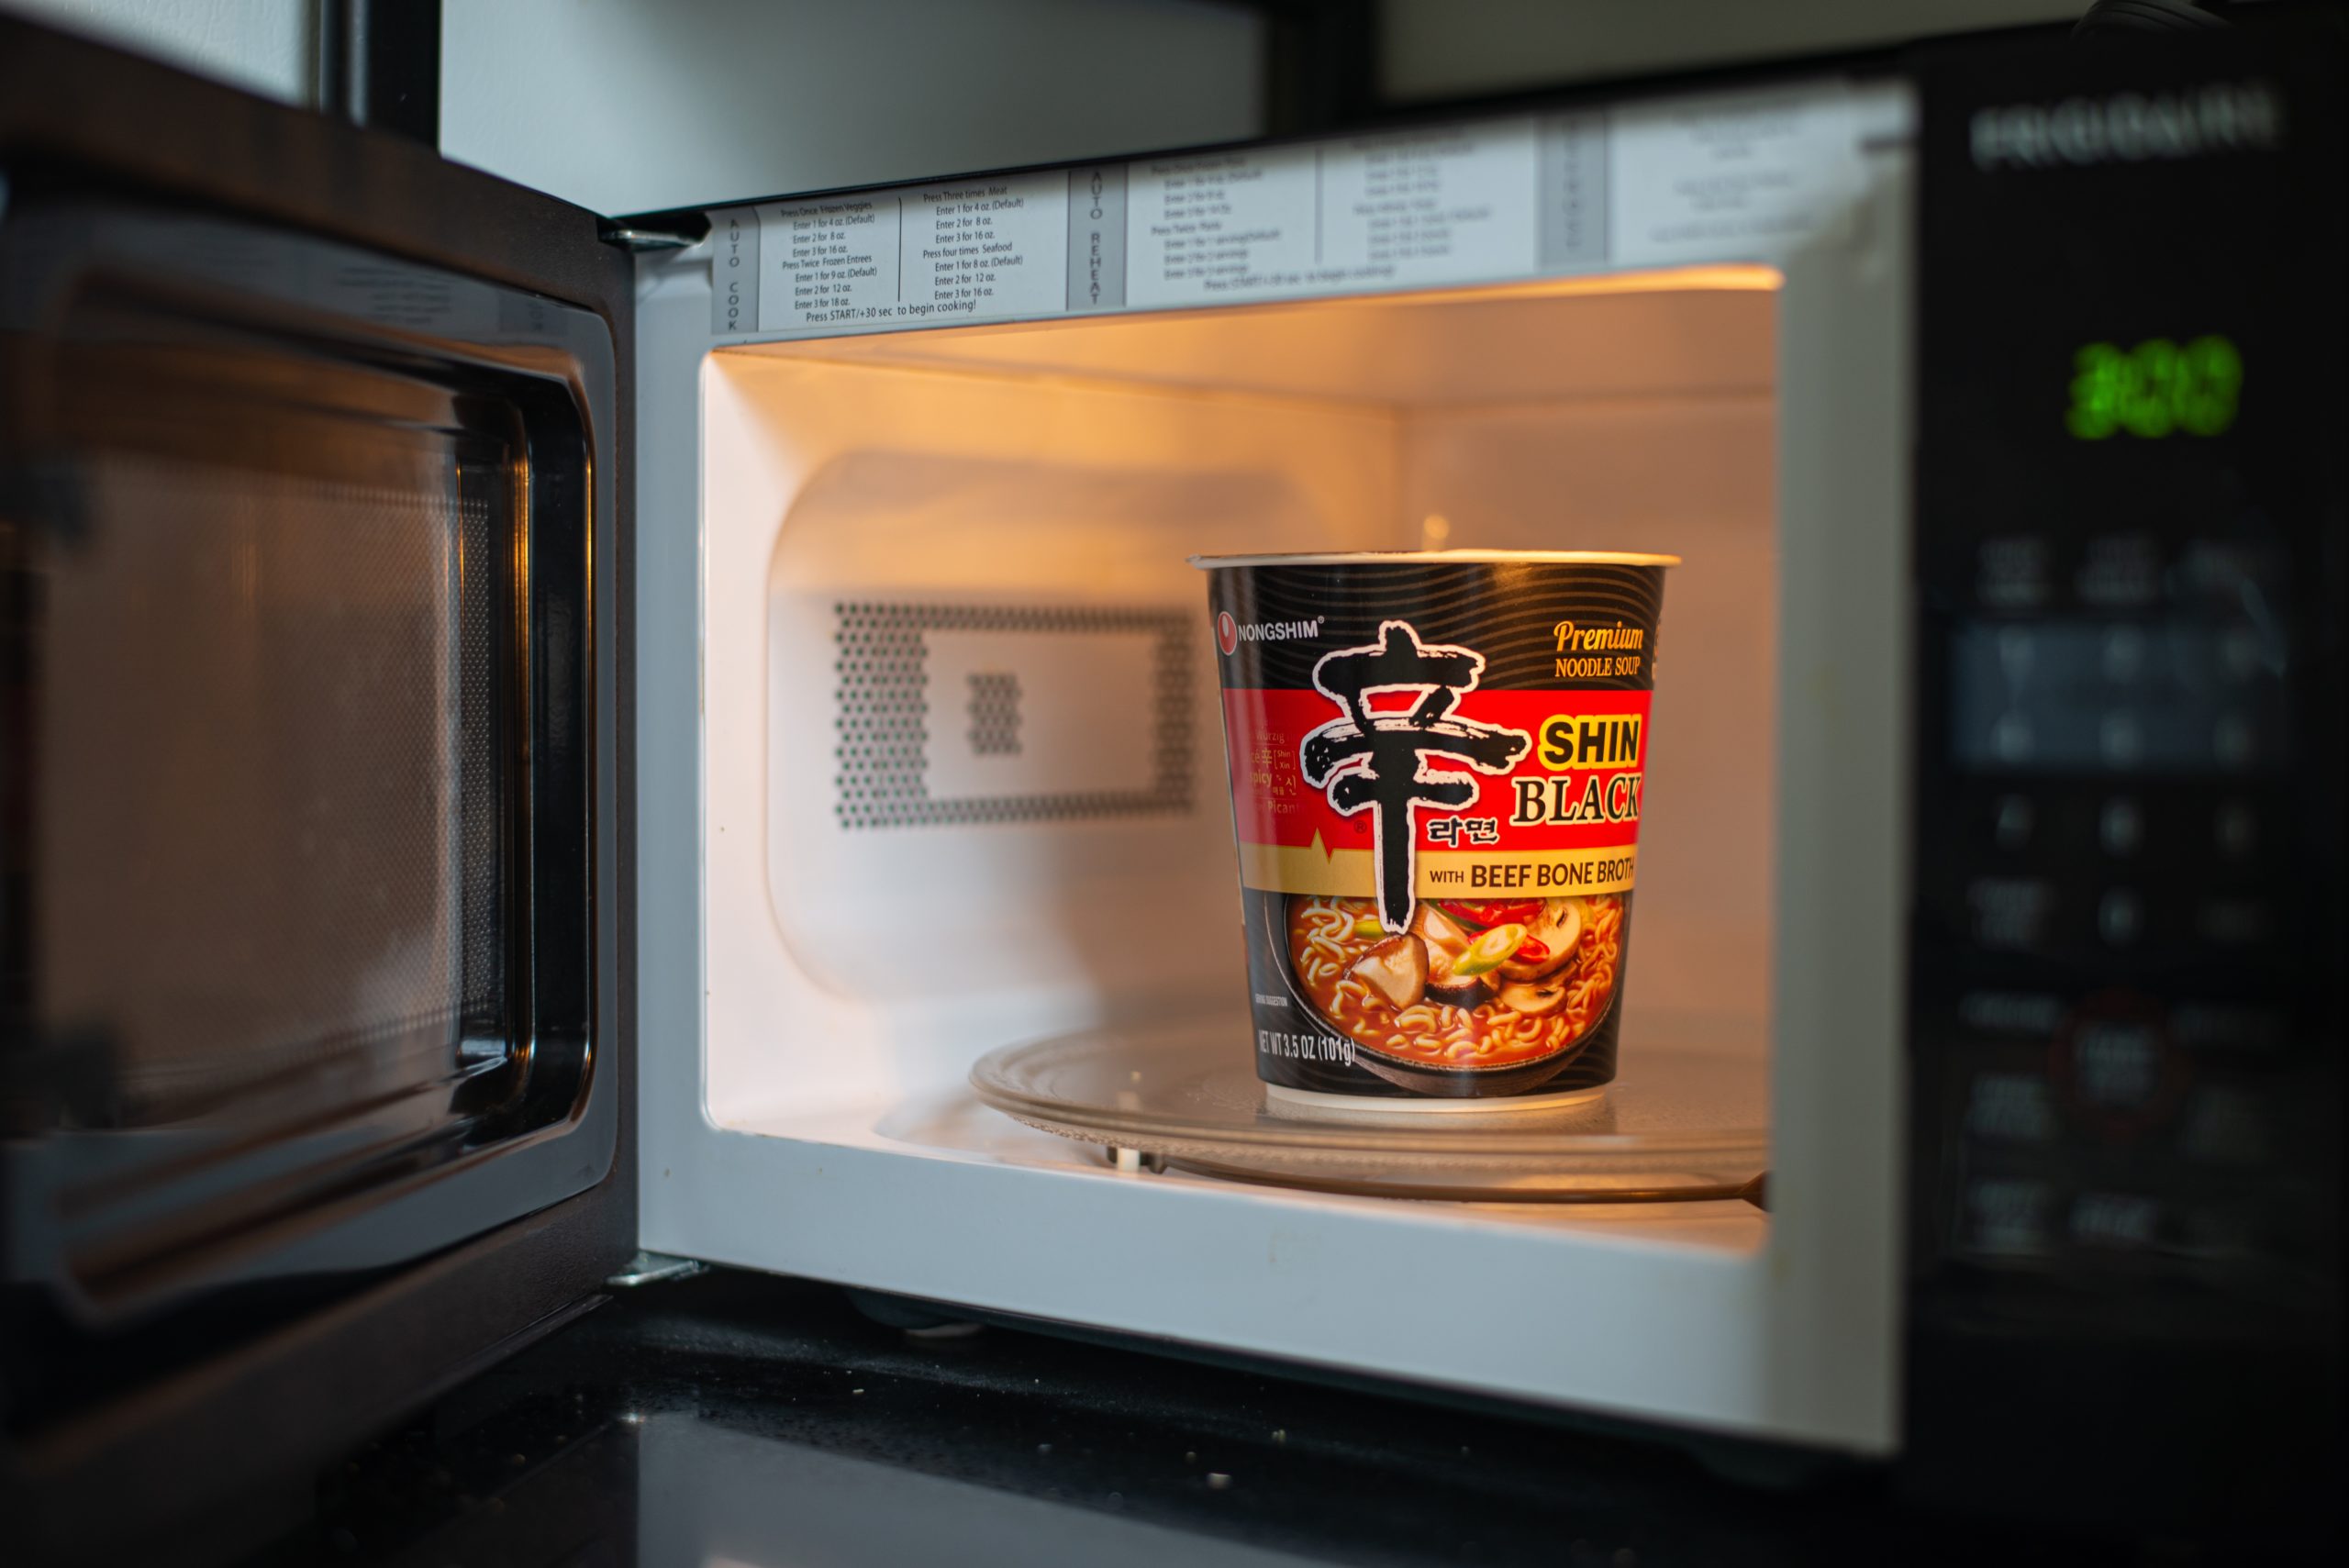 A Korean Nongshim cup noodle soup that is placed in microwave to be cooked